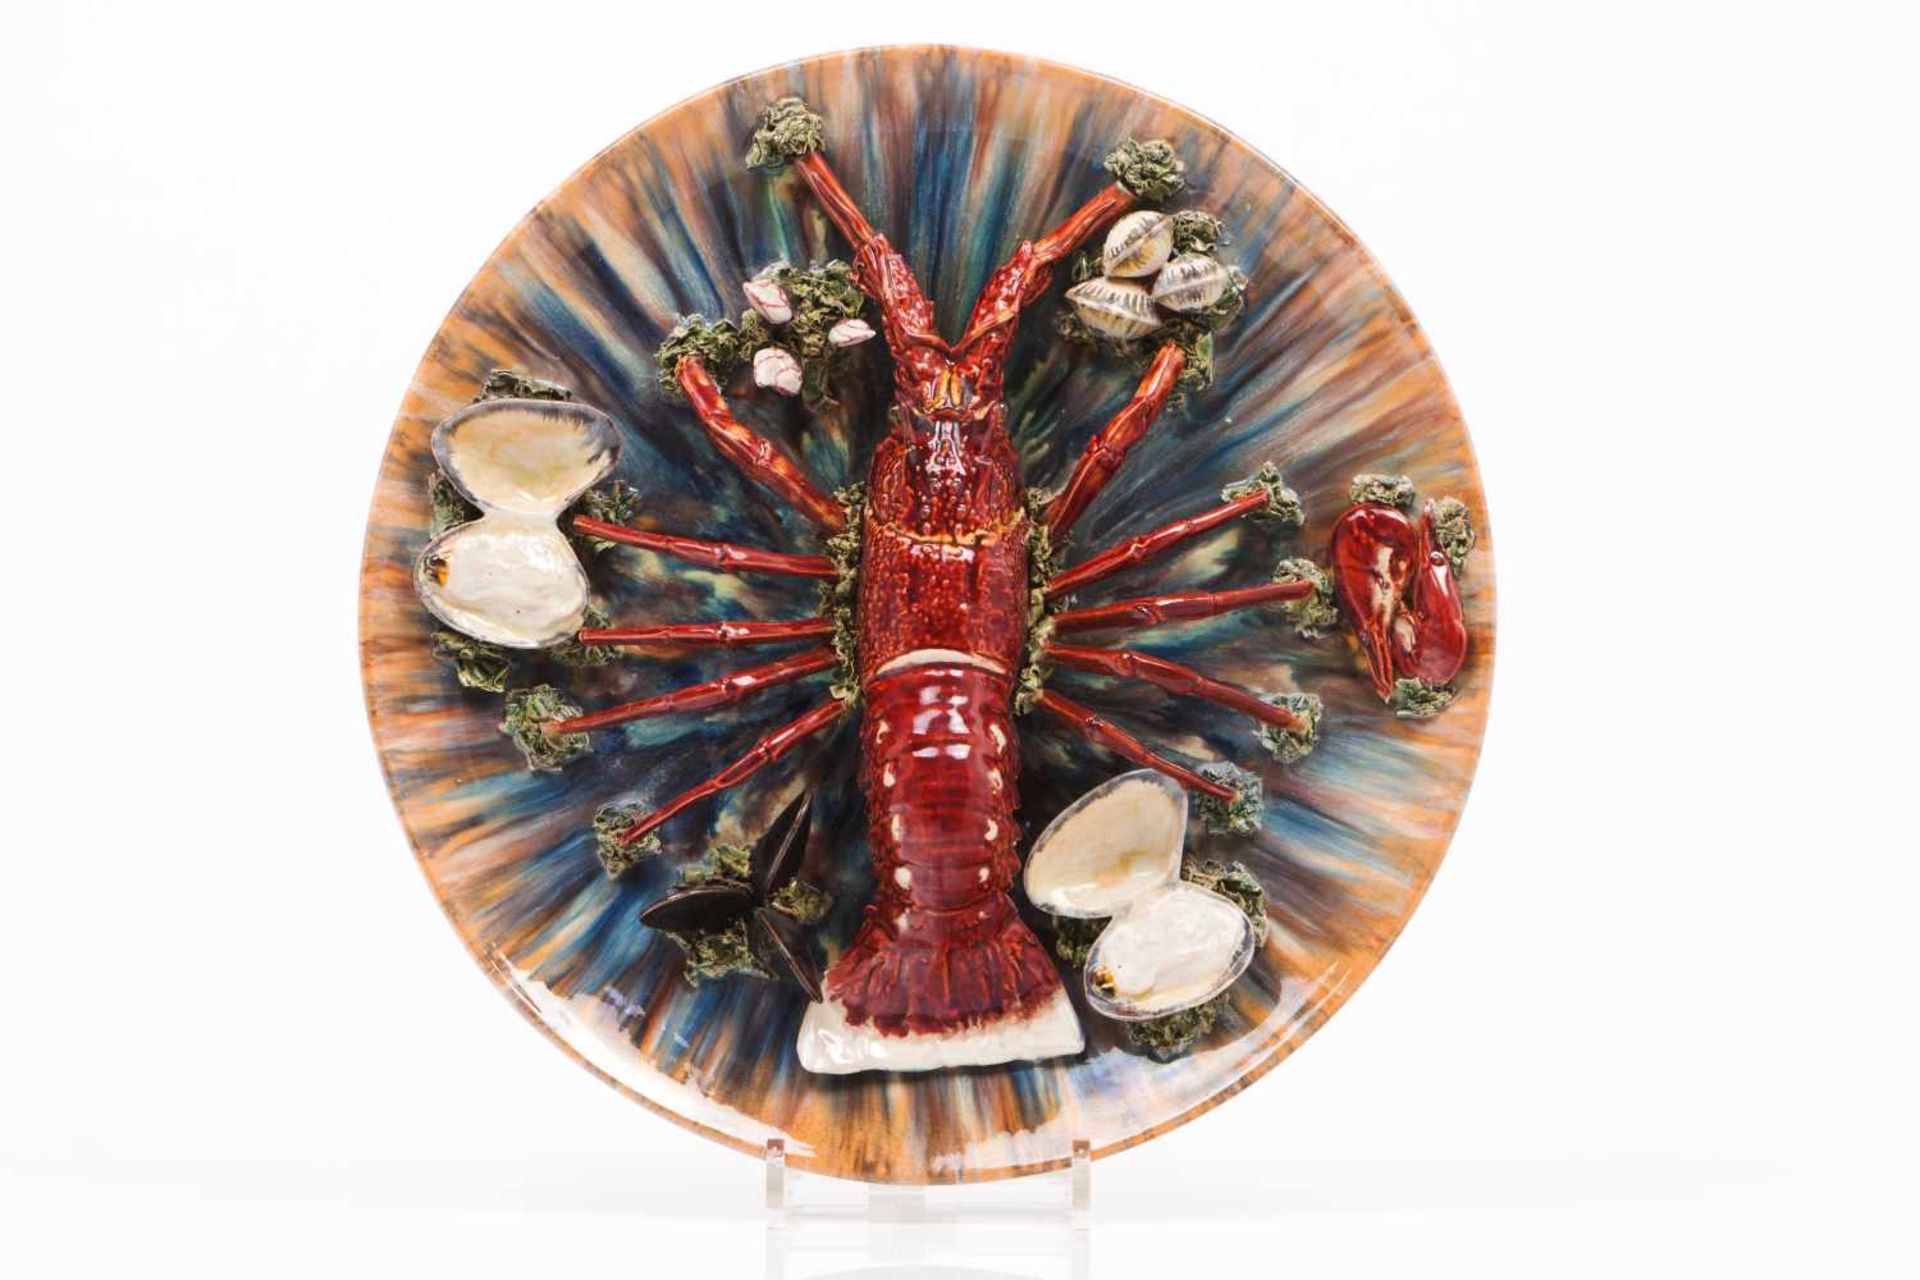 A platePortuguese faienceCaldas da RainhaPolychrome decoration in relief with lobster, bivalves